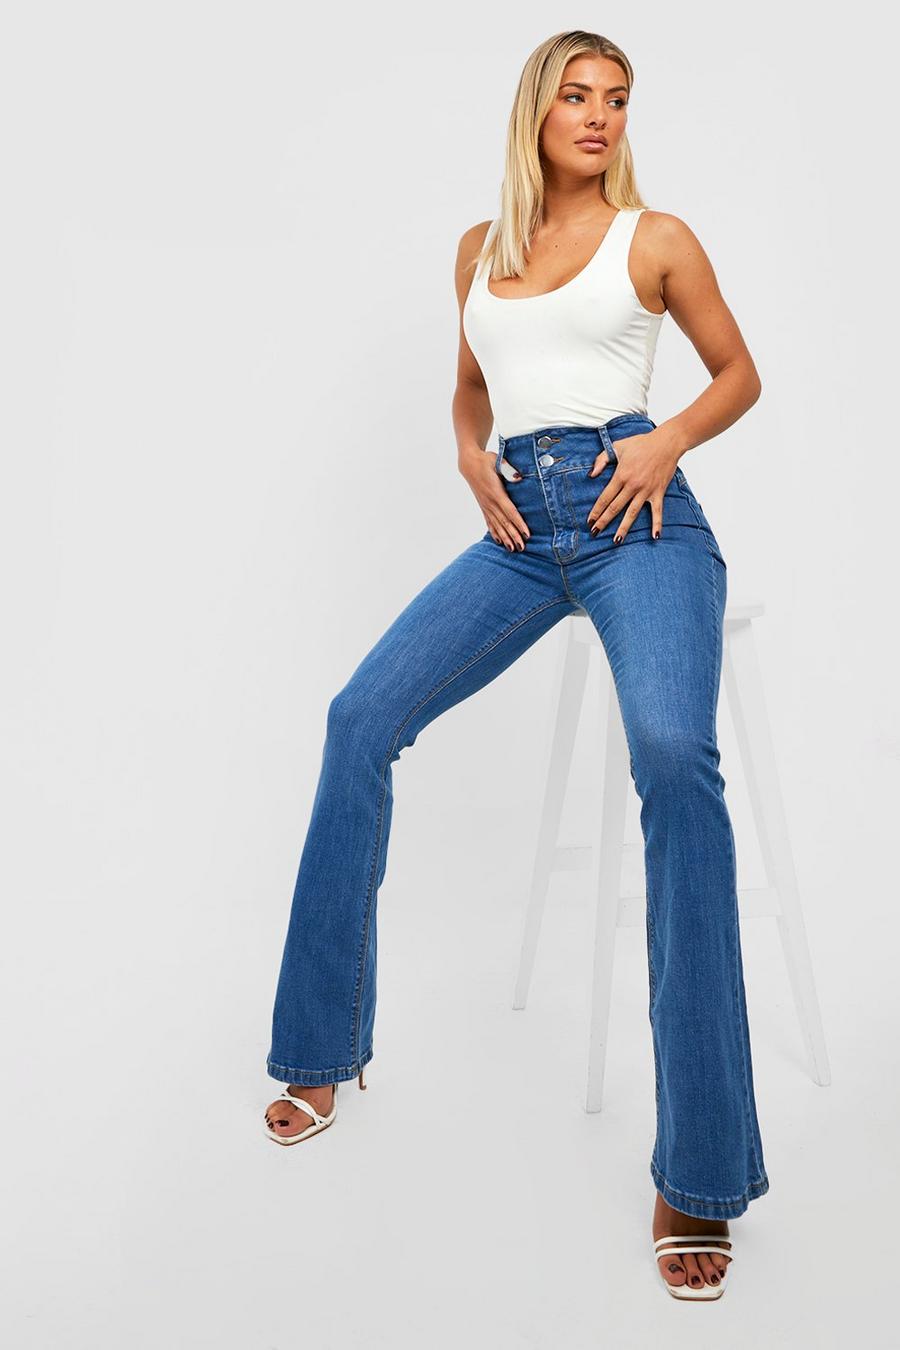 boohoo High Waisted Super Shaping Skinny Flared Jeans - Blue - Size 4